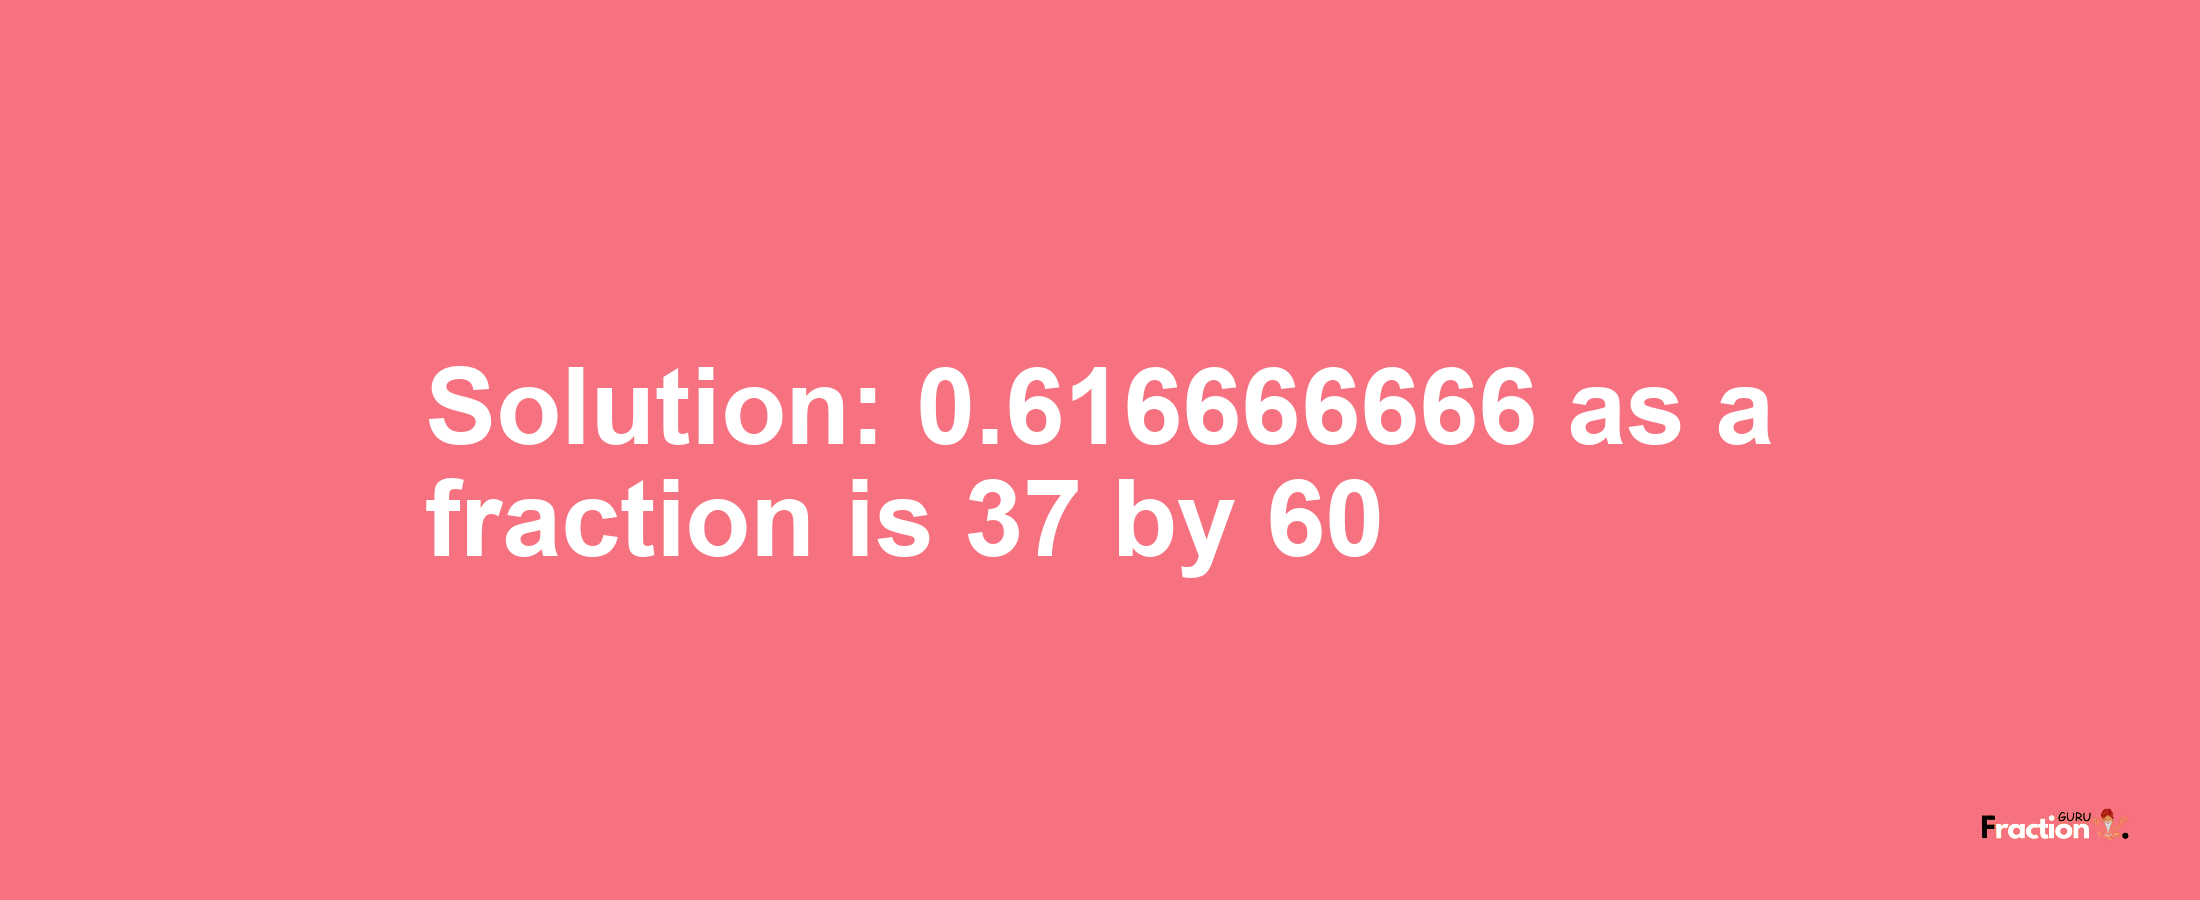 Solution:0.616666666 as a fraction is 37/60